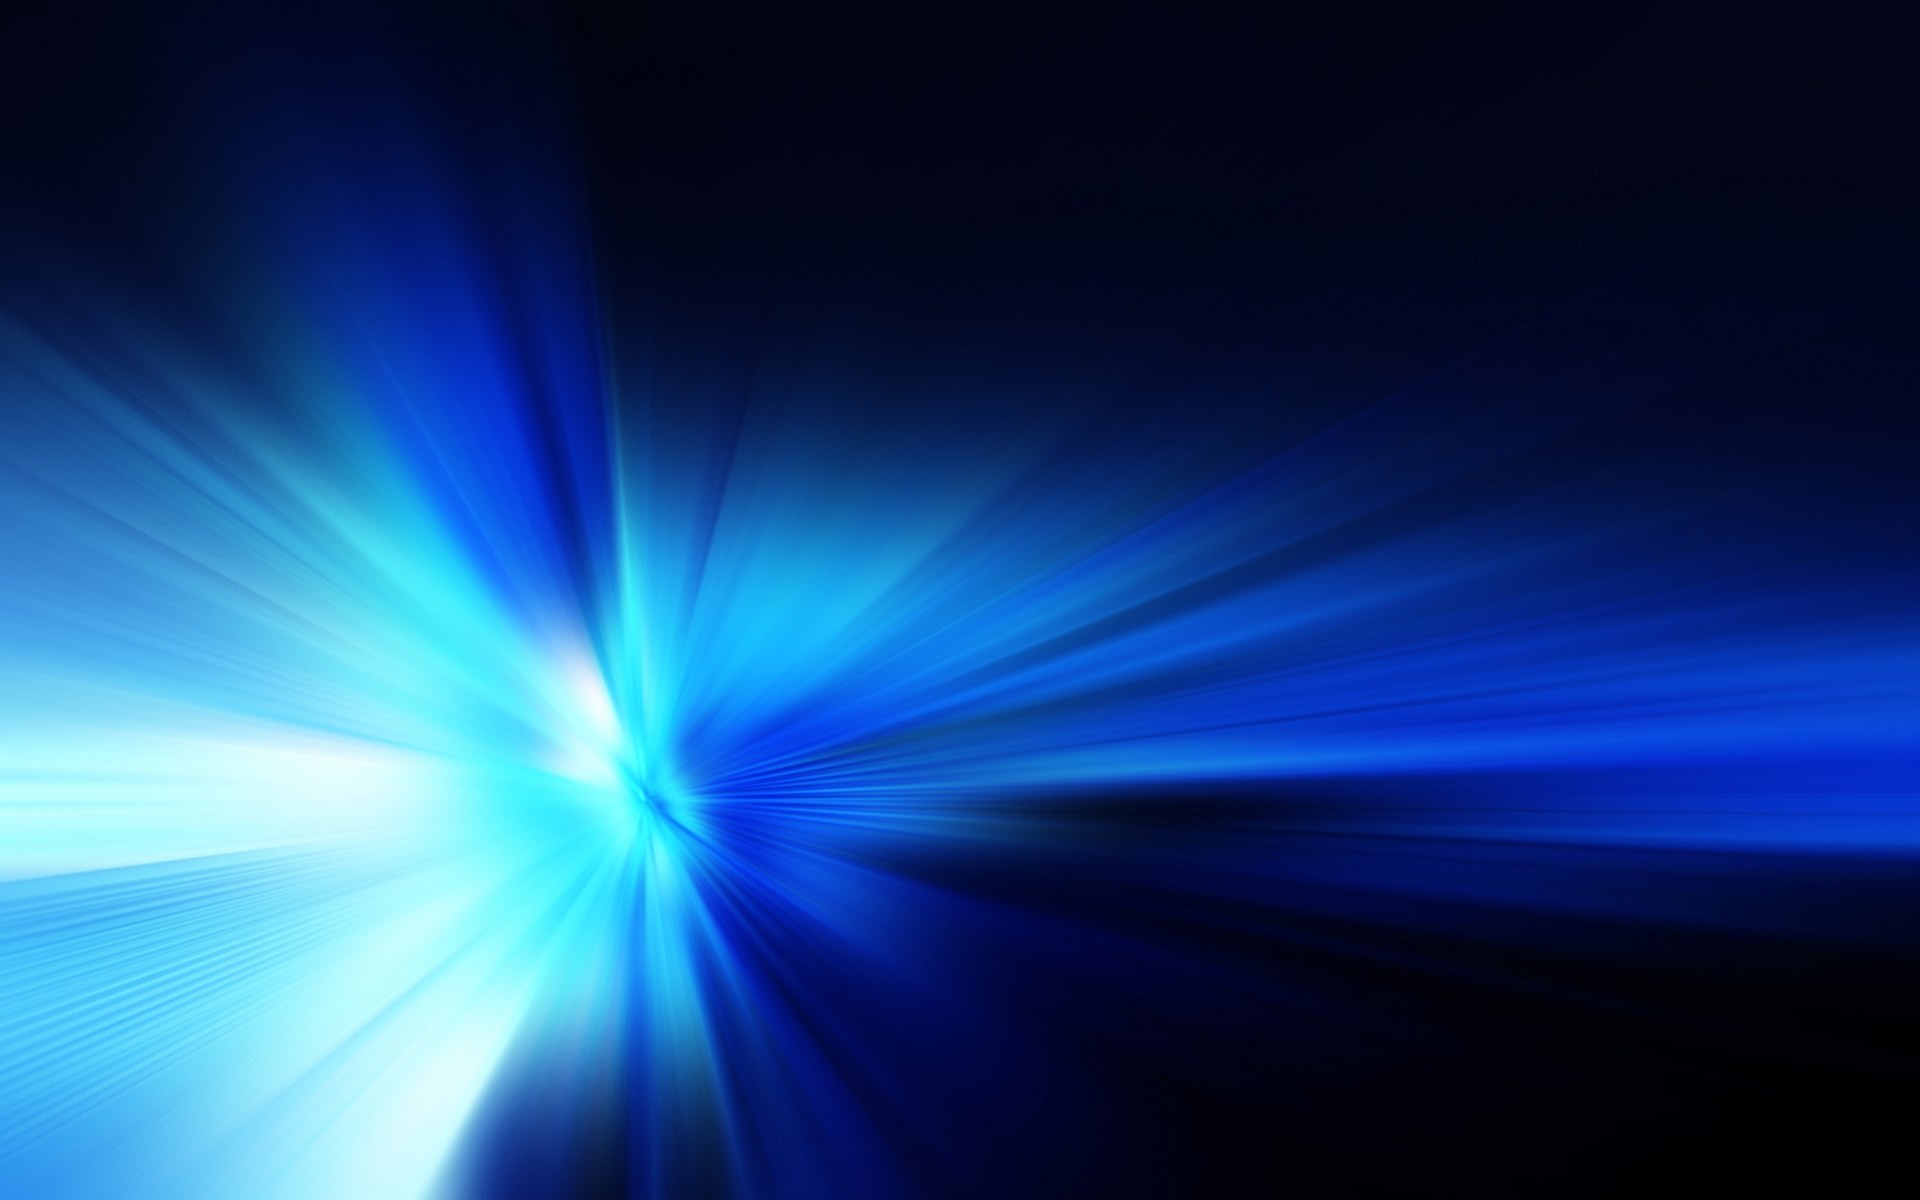 1920x1200 Abstract Backgrounds Blue 2946 Hd Wallpapers in Abstract - Imagesci .